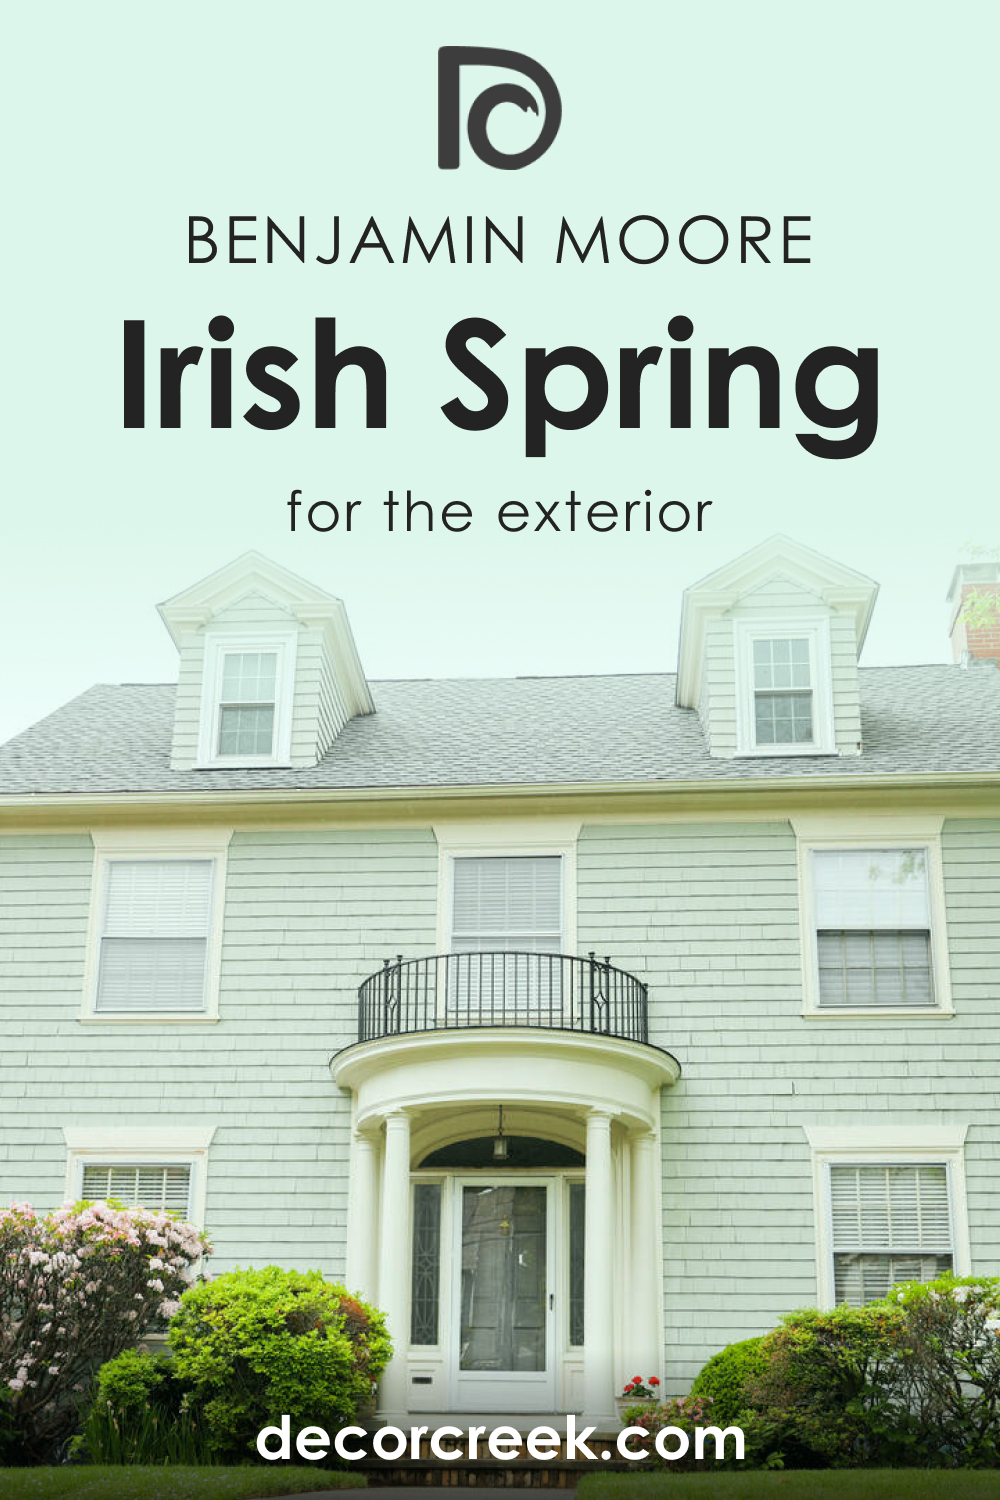 How to Use Irish Spring 2038-70 for an Exterior